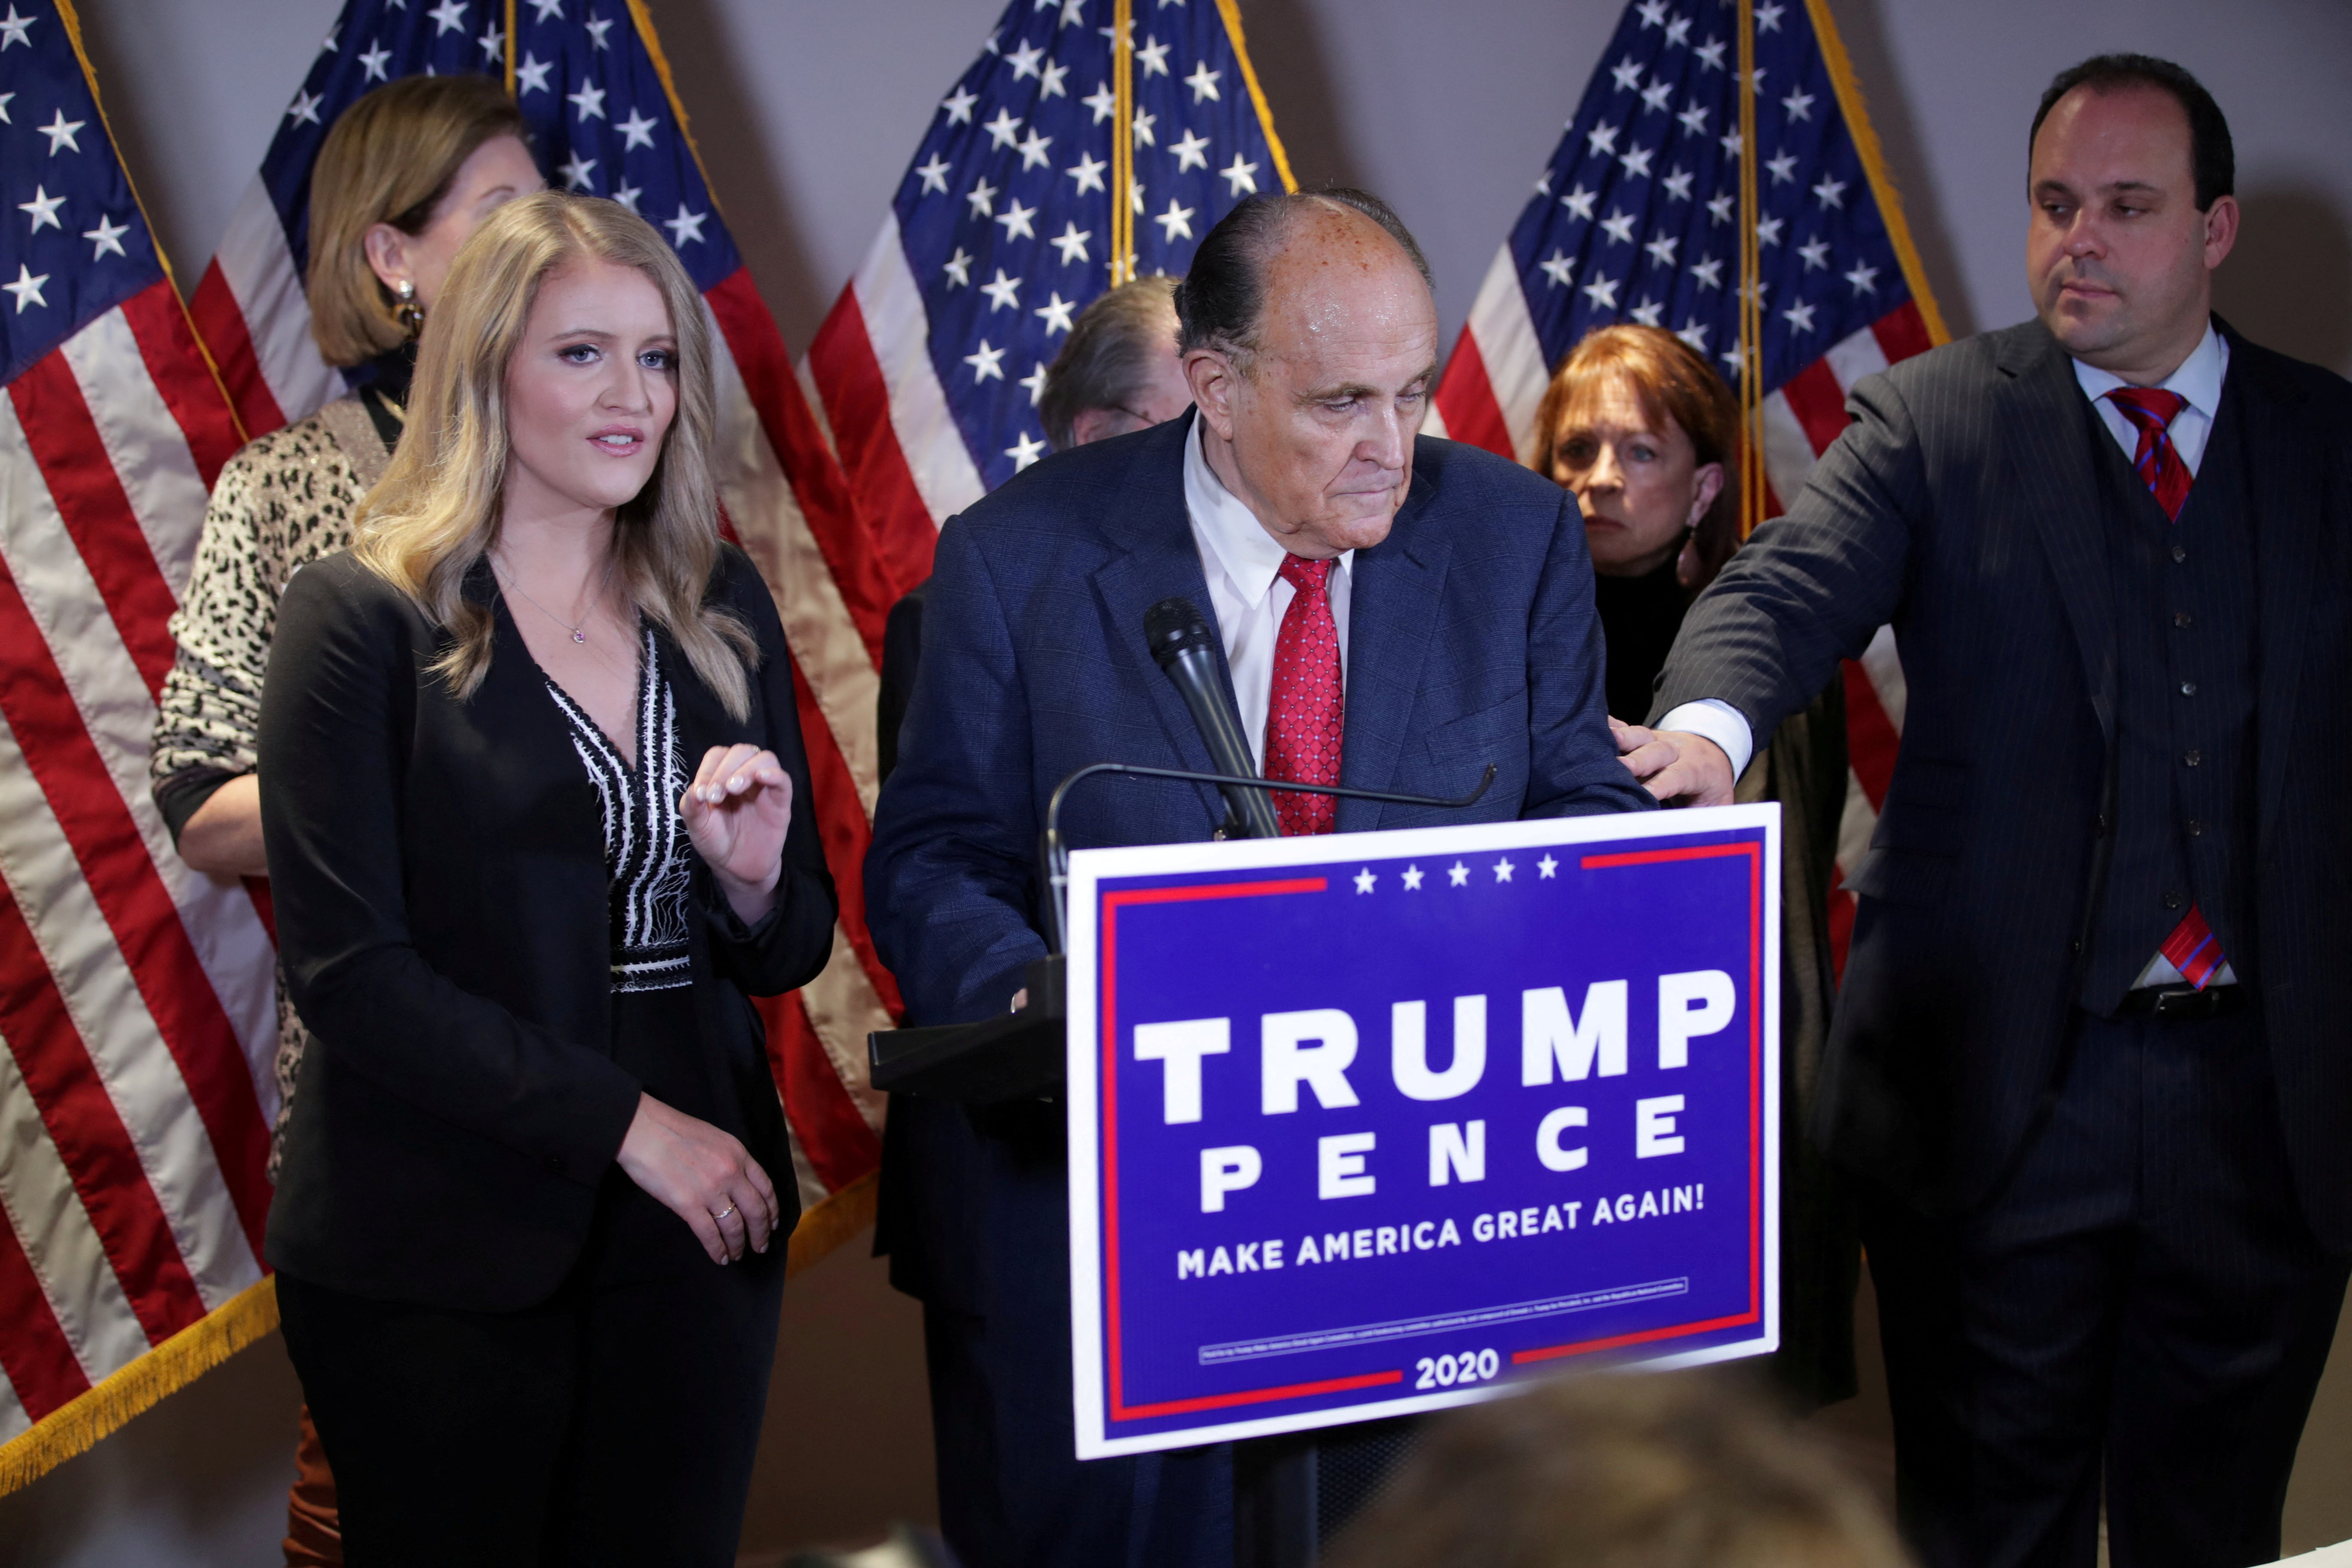 Rudy Giuliani speaks at a press conference next to Jenna Ellis, left, amplifying bogus fraud claims in the wake of the 2020 election